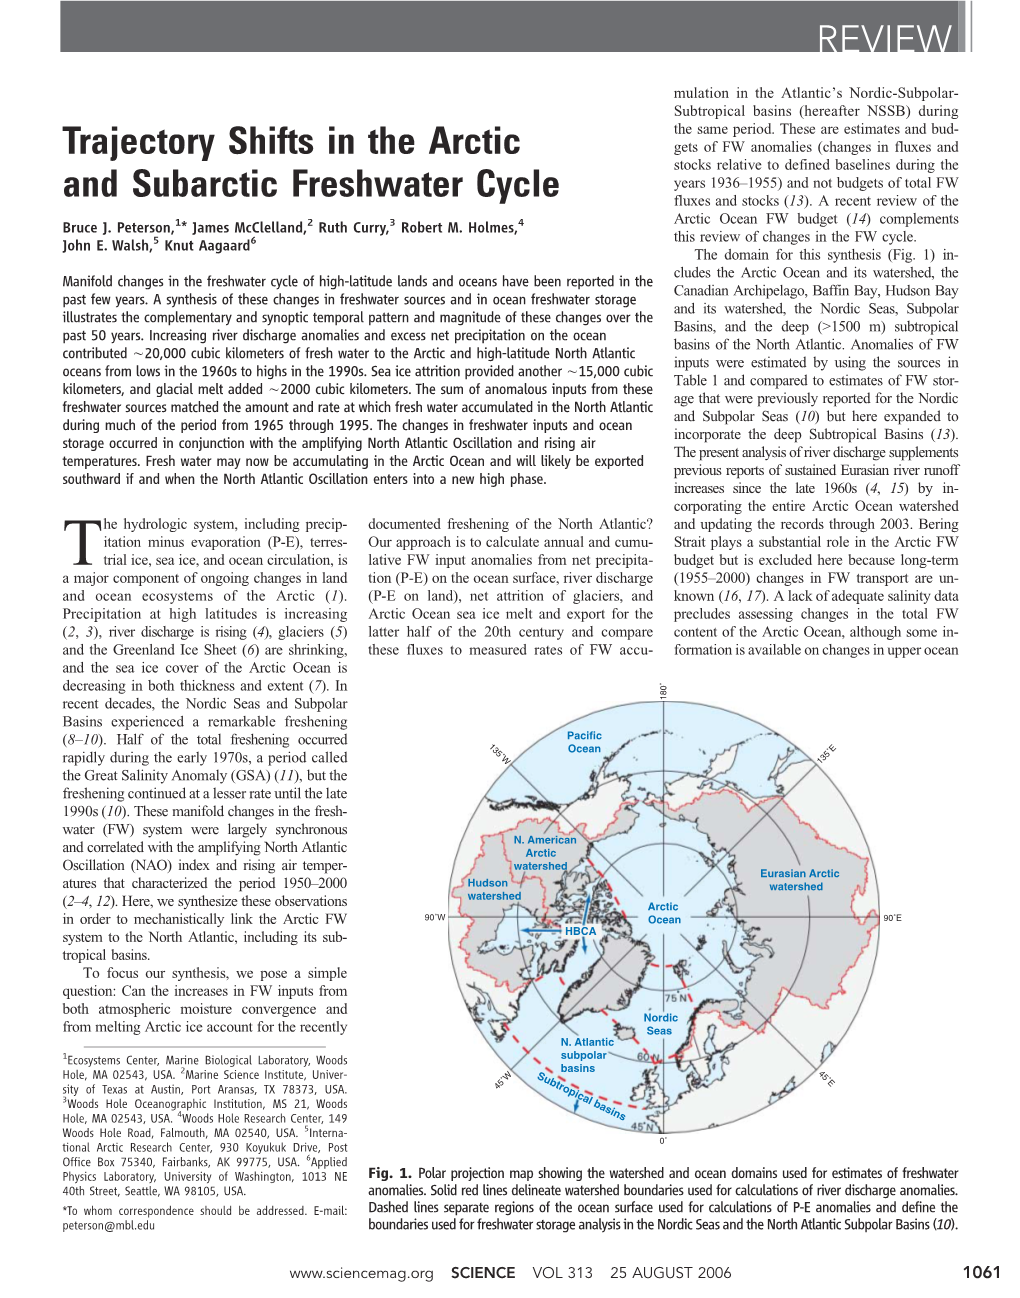 Trajectory Shifts in the Arctic and Subarctic Freshwater Cycle REVIEW